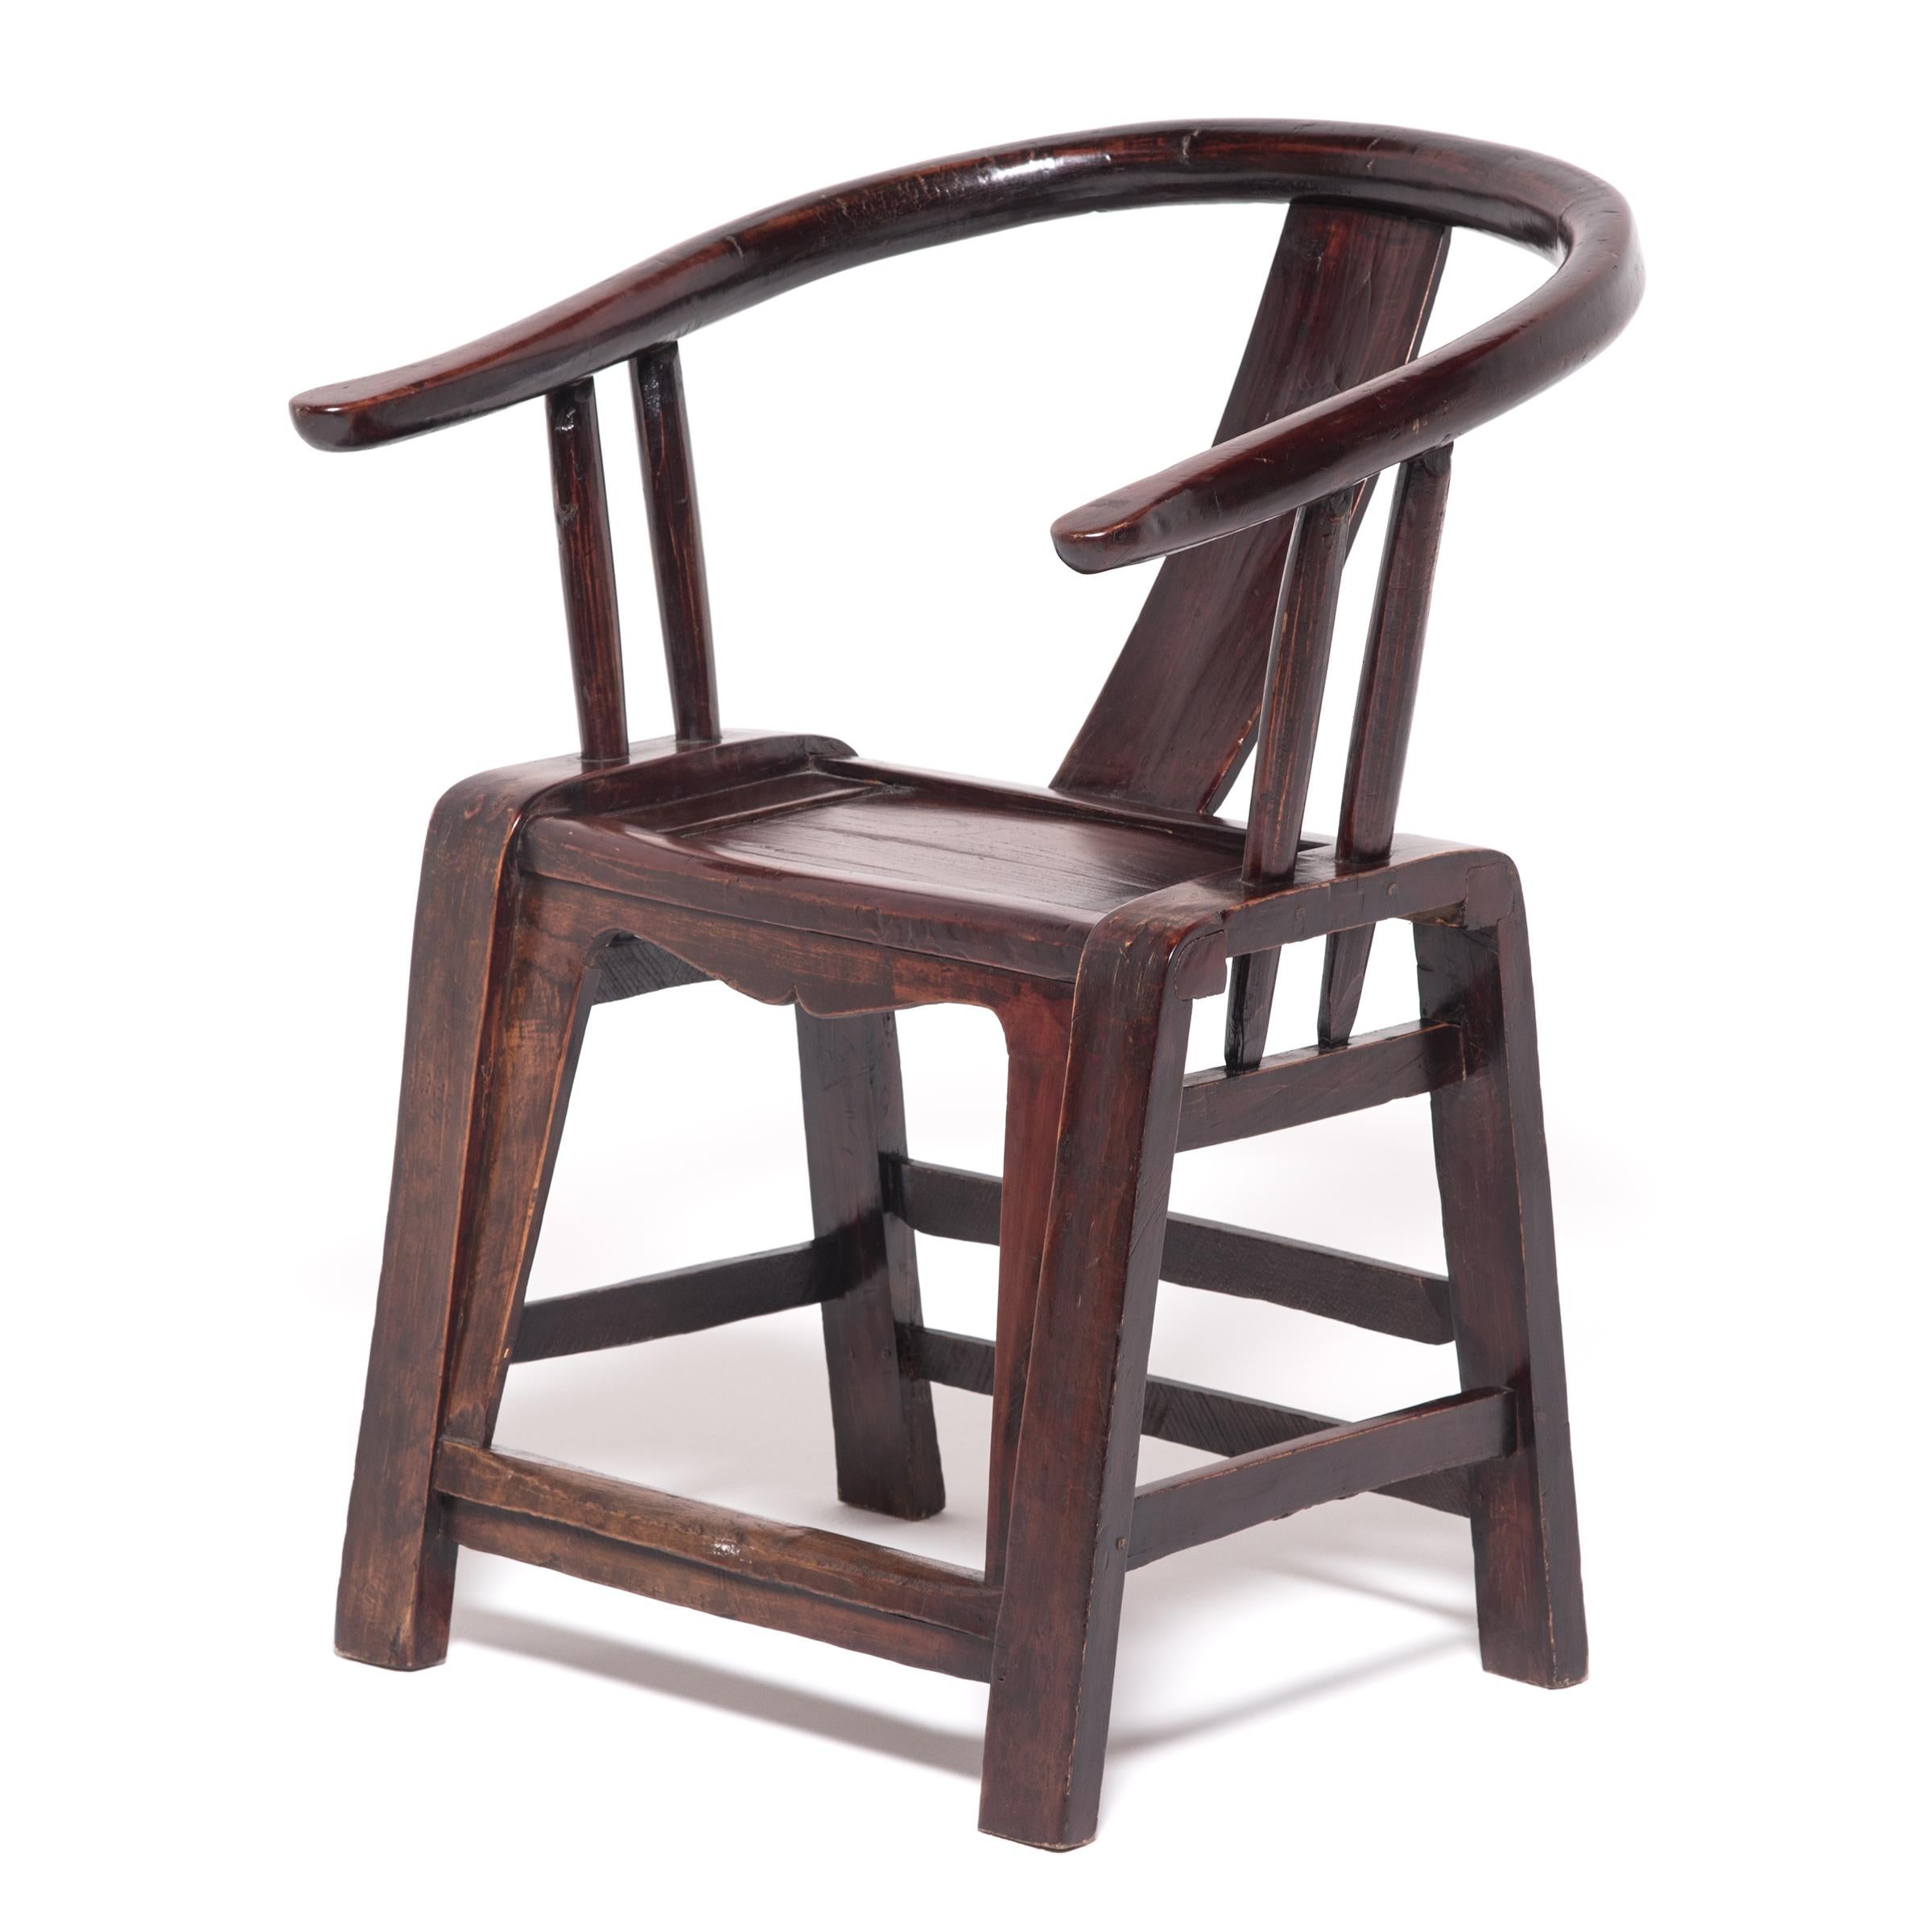 Prior to the 10th century, Chinese society eschewed raised seats in favour of mats. Upon the rising popularity of chairs and other forms of elevated seating, craftsmen began adapting traditional cabinetry and architecture techniques to the human